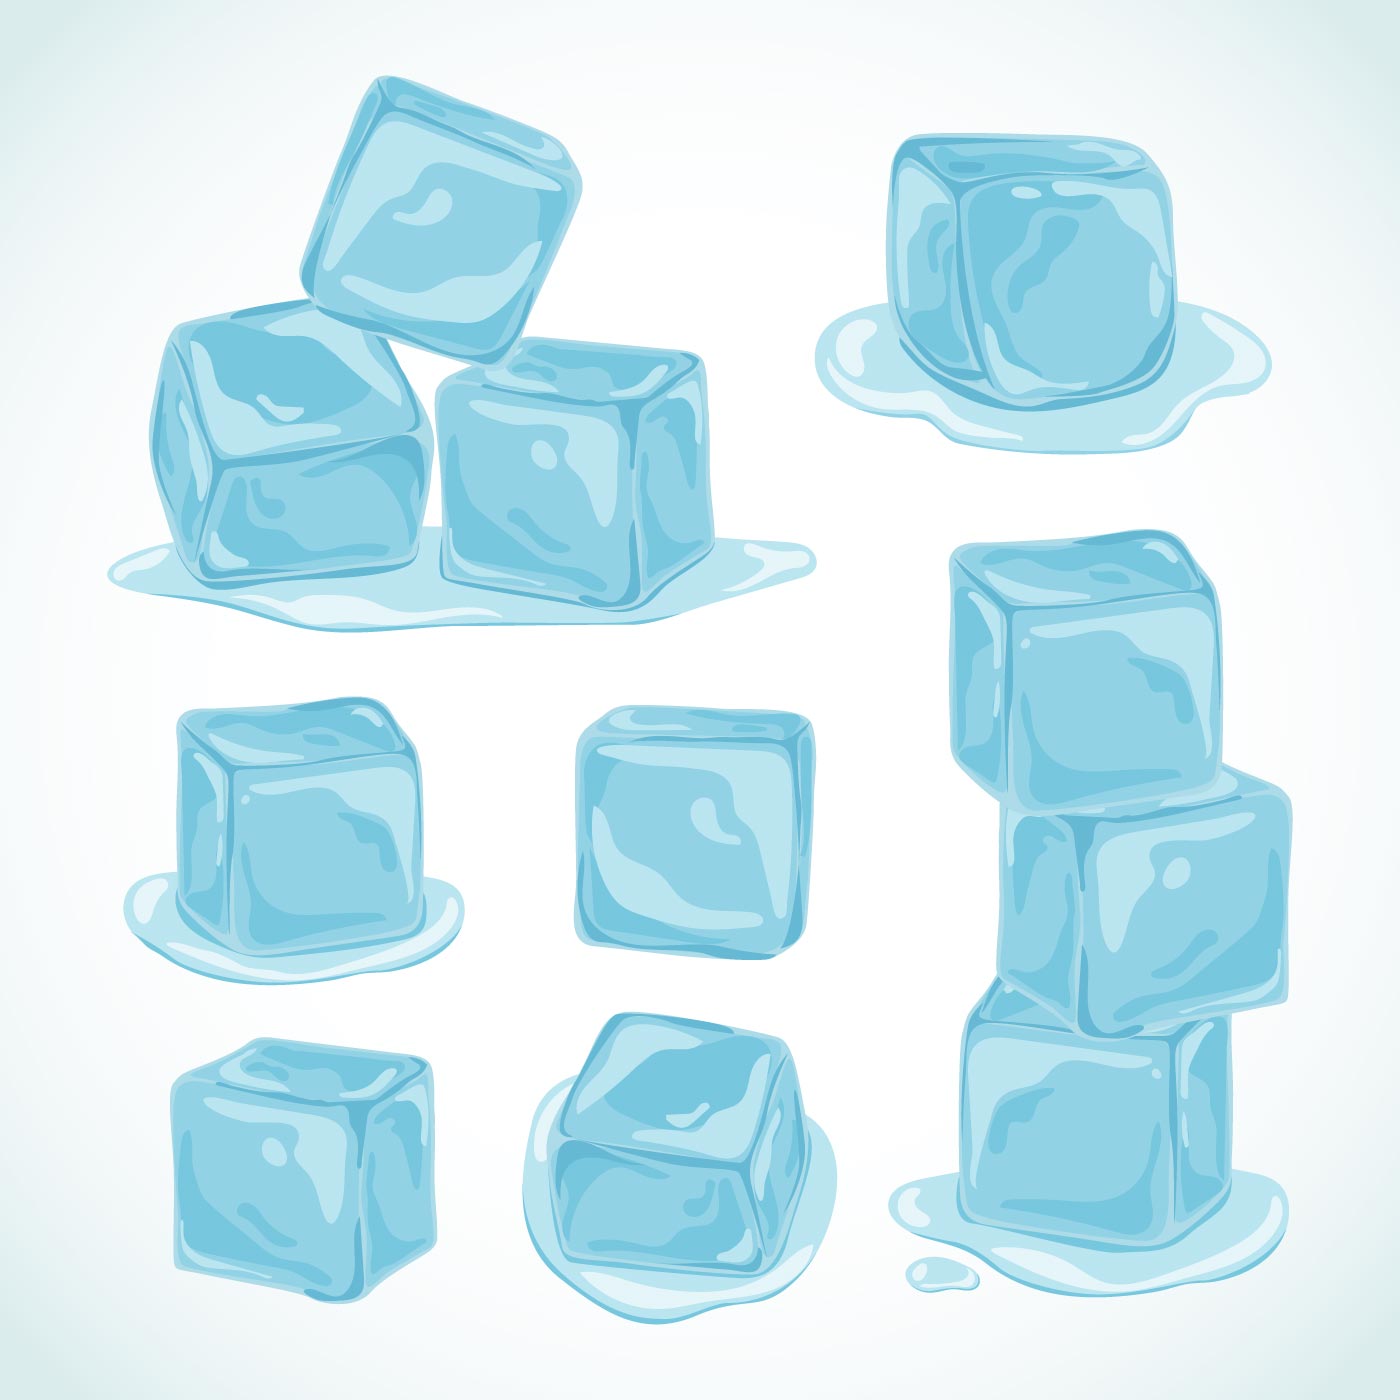 Ice cubes clipart collection 551605 Download Free